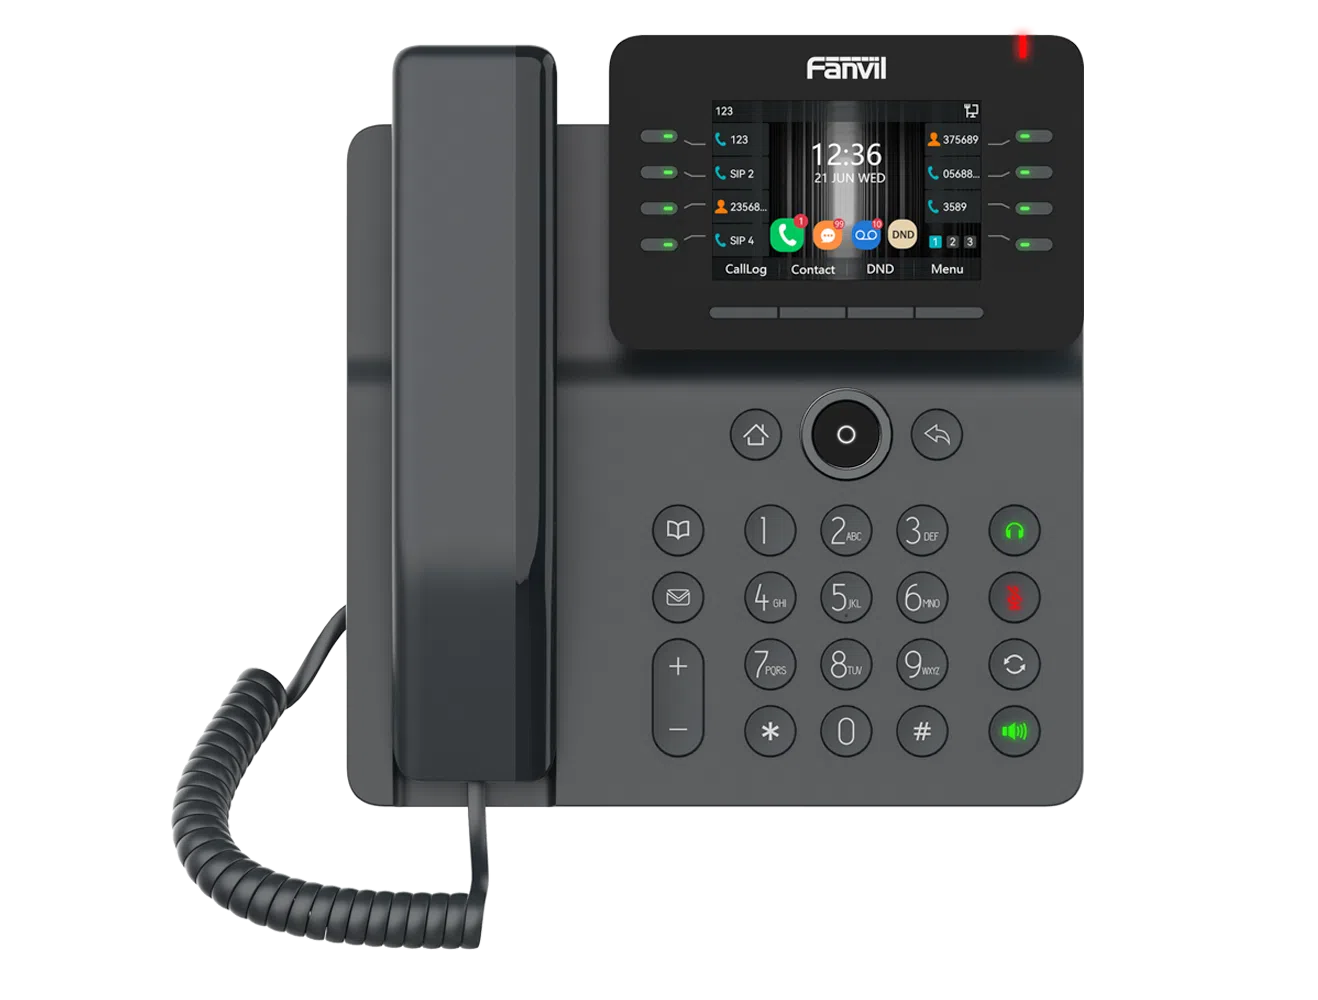 Is it possible to connect a wireless headset to the Fanvil V64 Enterprise Phone?